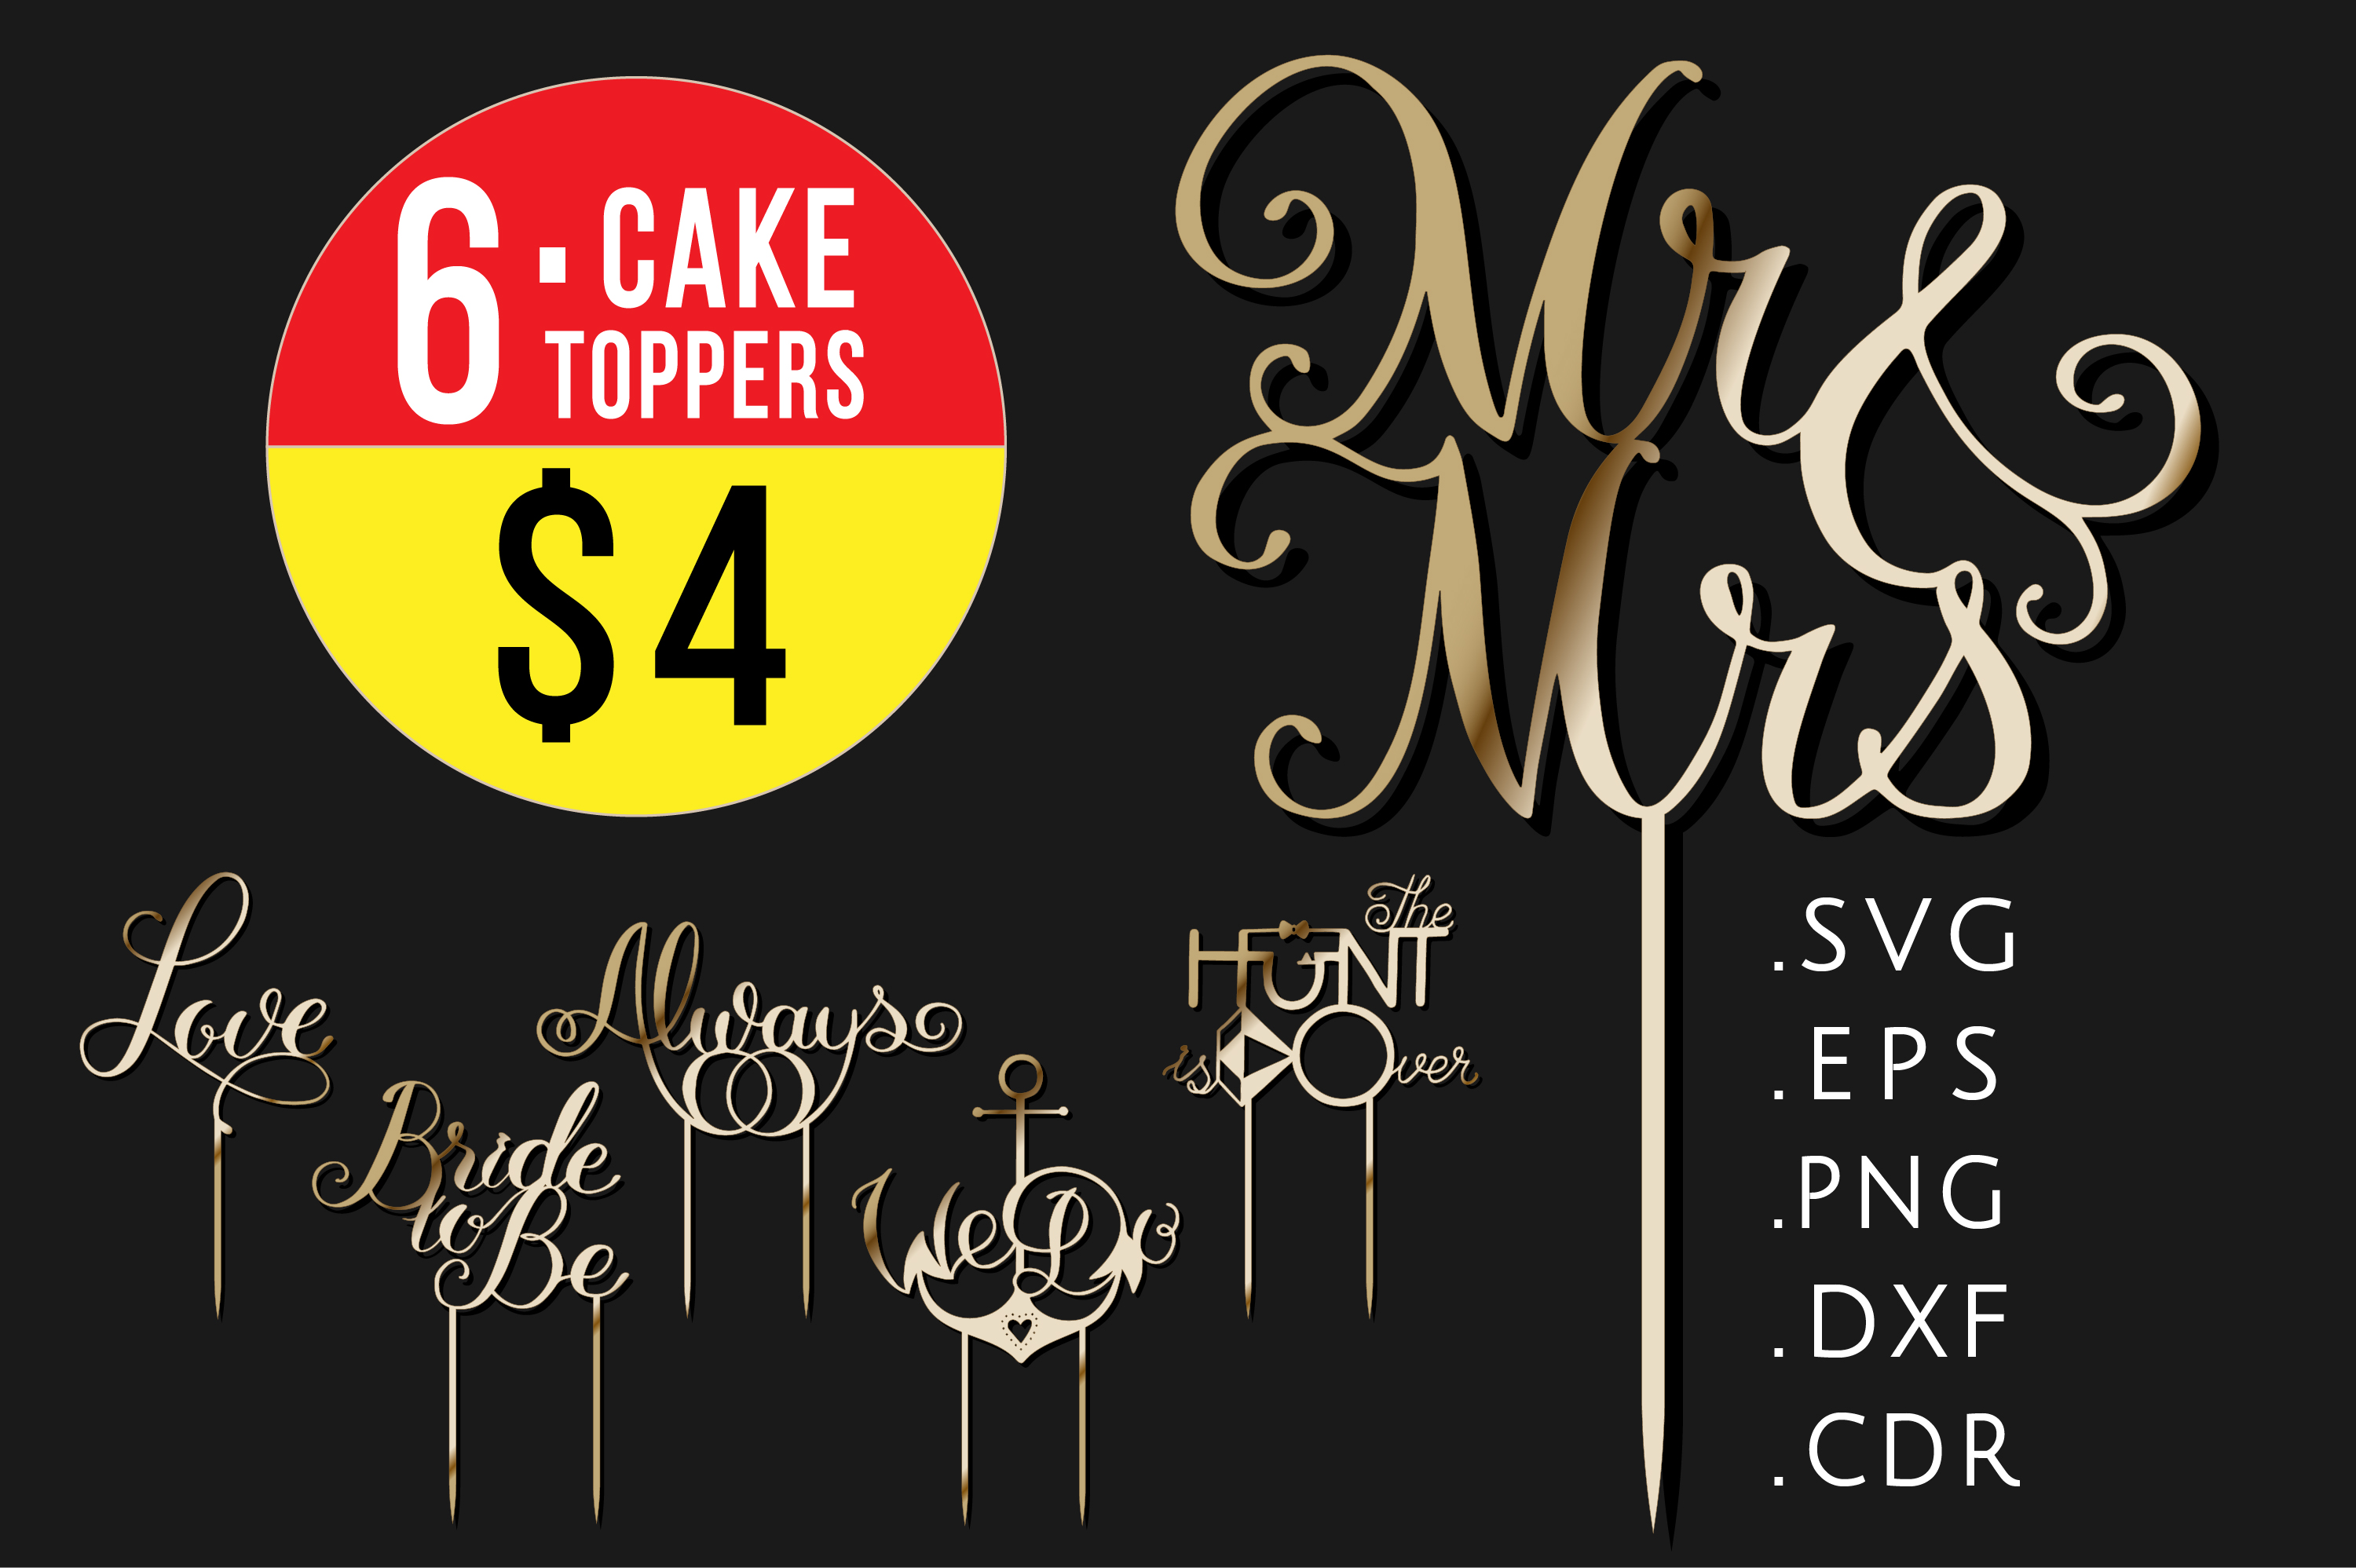 Download 6 Wedding Cake toppers, SVG templates, Mr and Mrs party sign